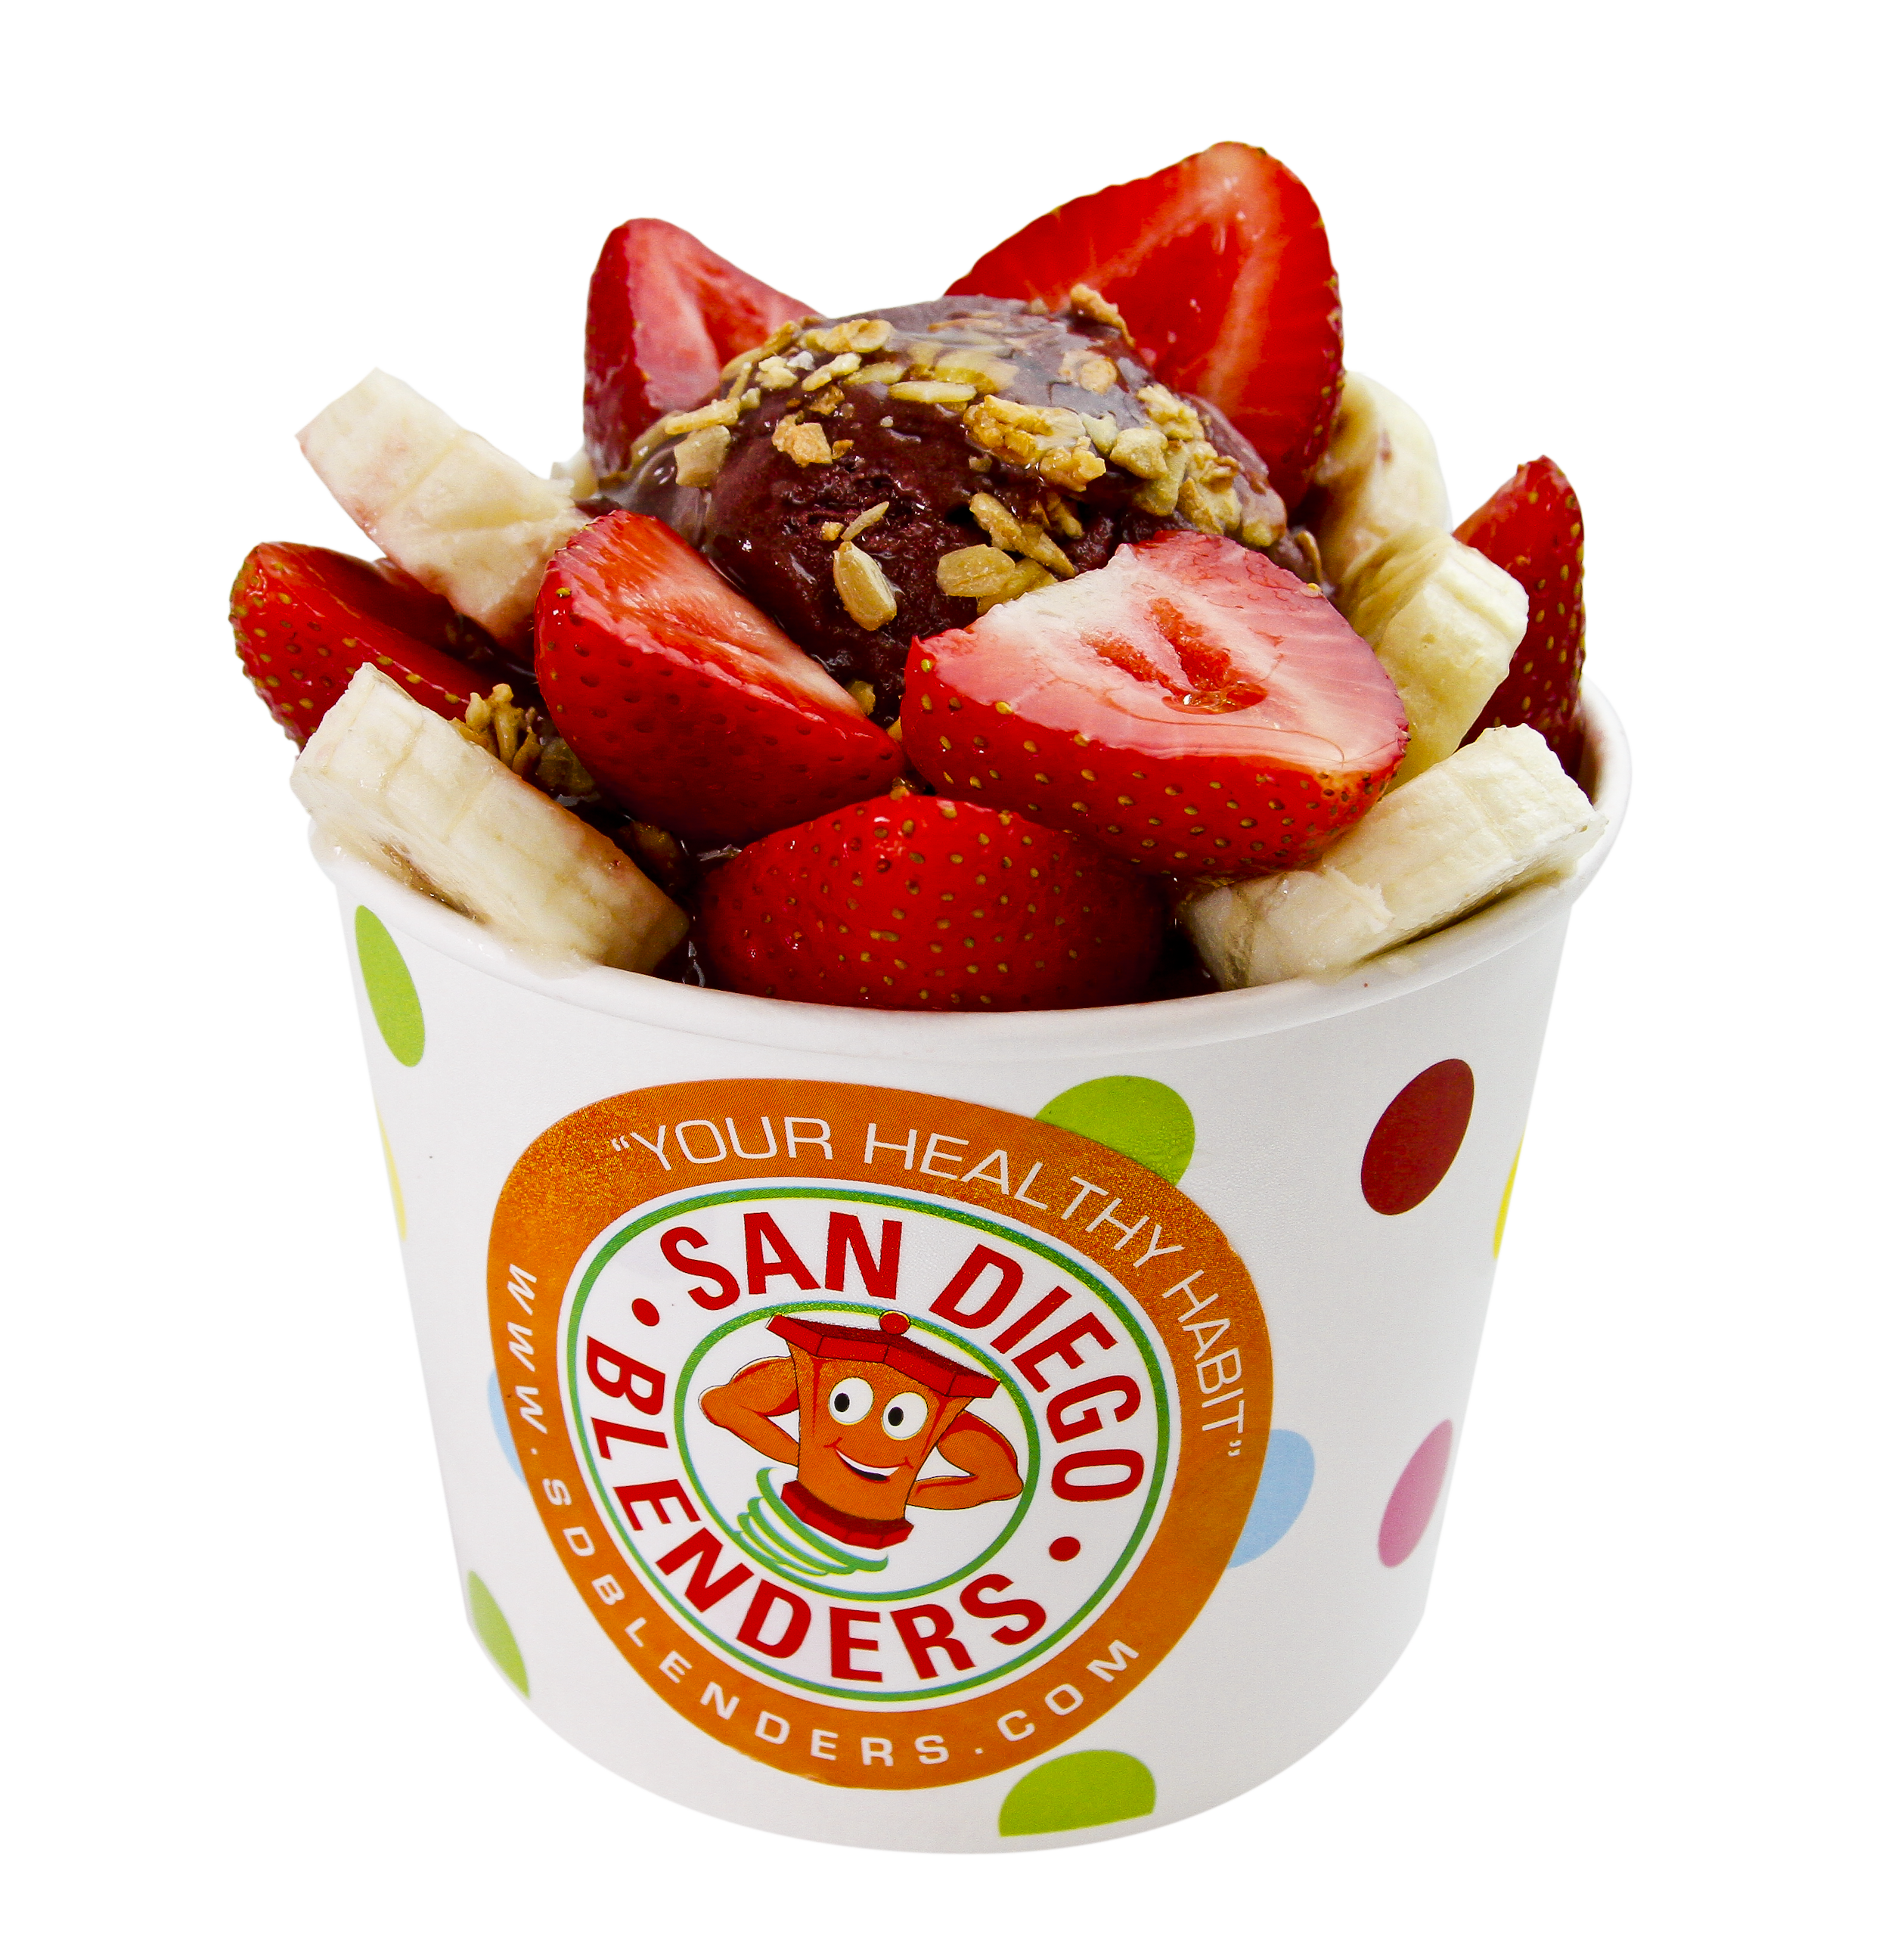 https://sdblenders.com/wp-content/uploads/2019/04/LocalGrowers_AcaiBowl.png